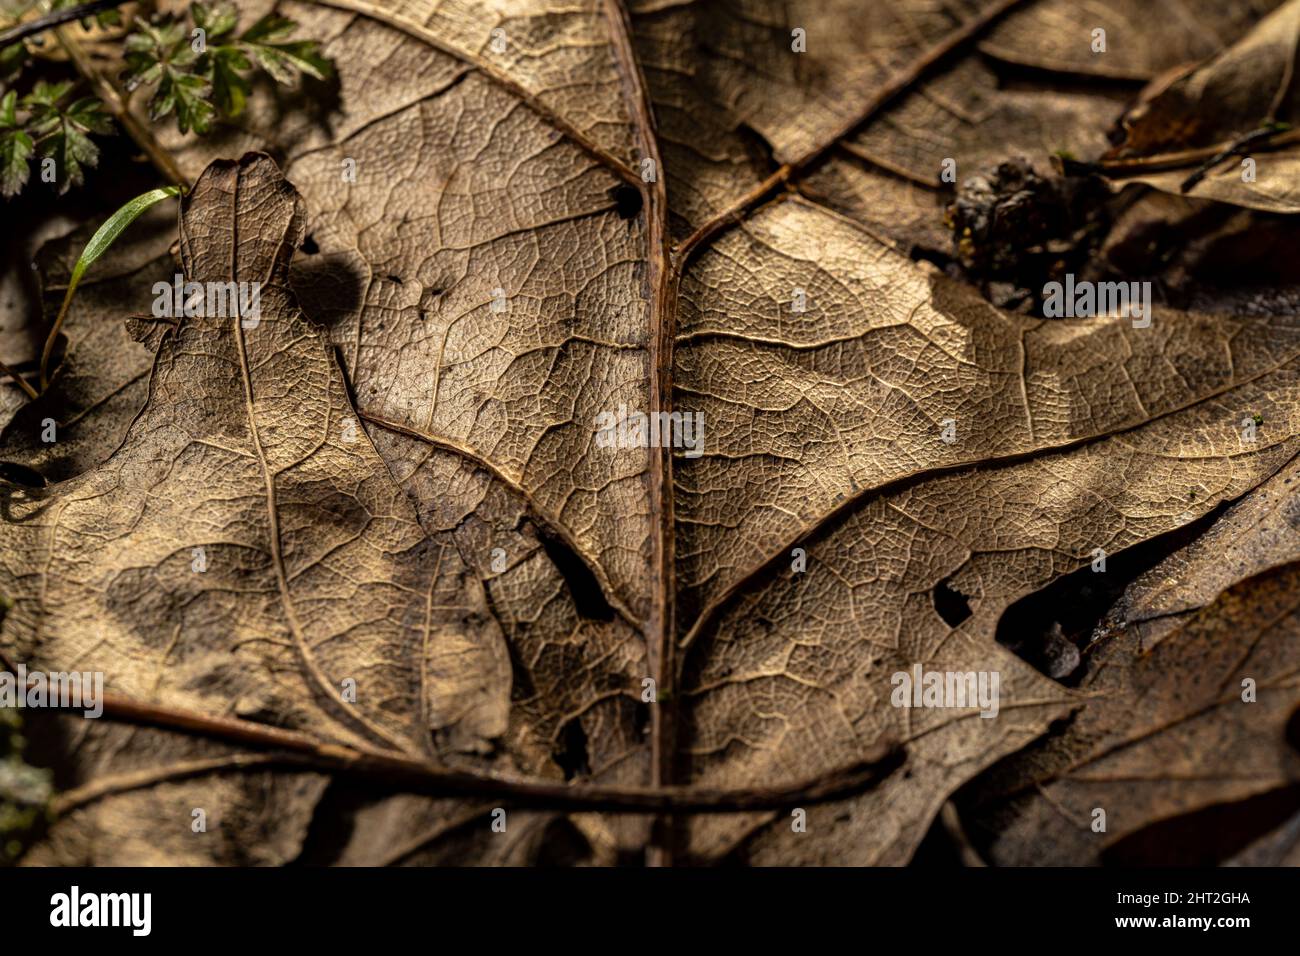 Brown decaying autumn leaves with viens and texture in a natural ...